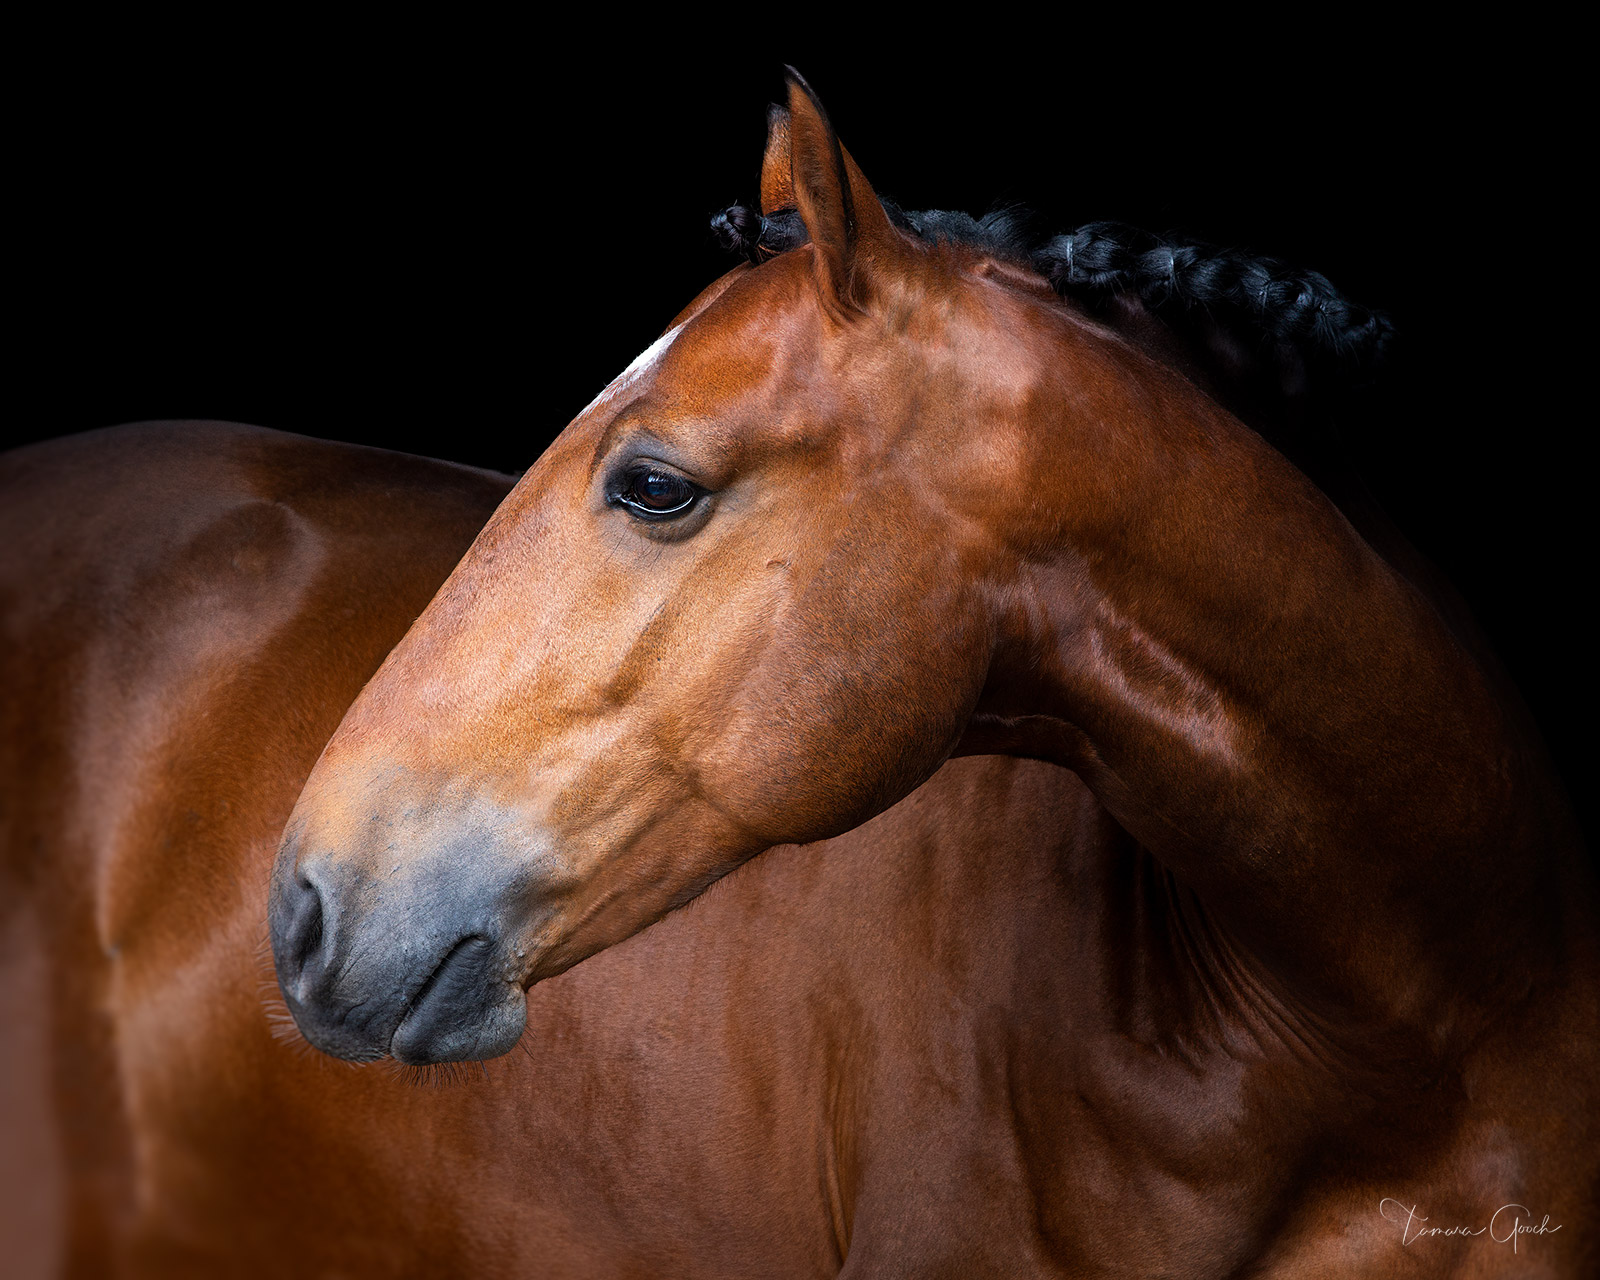 A fine art limited edition photo print for sale of a Bay Lusitano horse with mane braided 